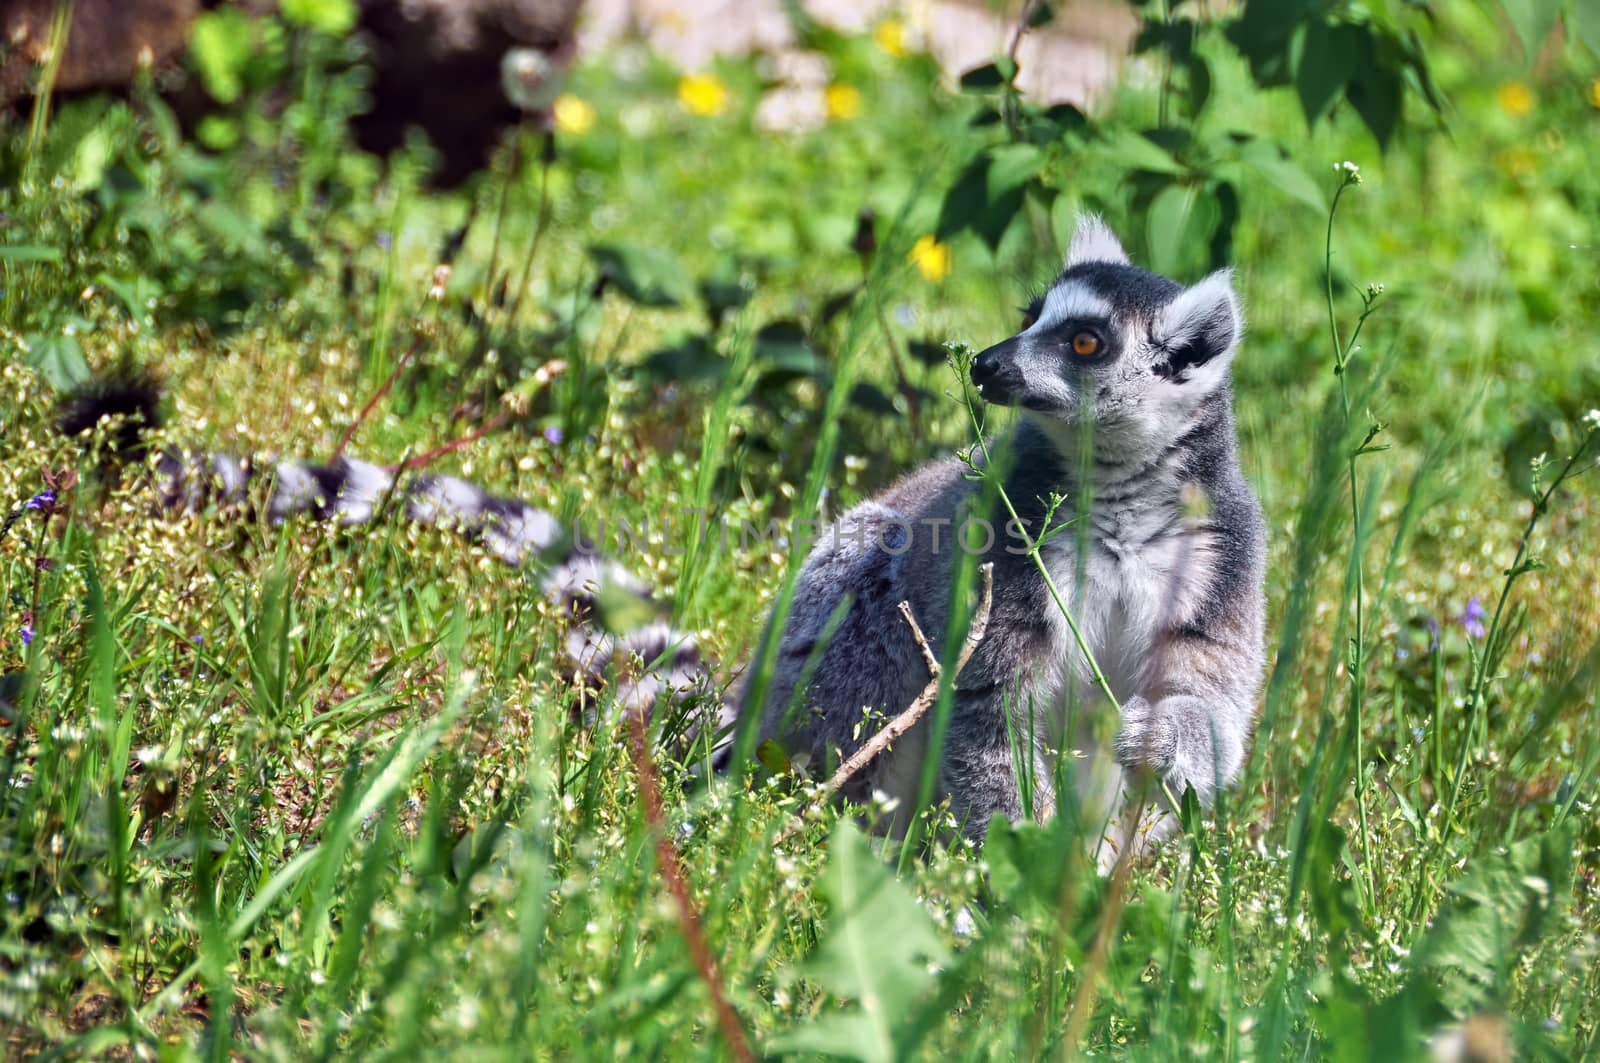 Lemur with black and white ringed tail smelling a flower outside on nature